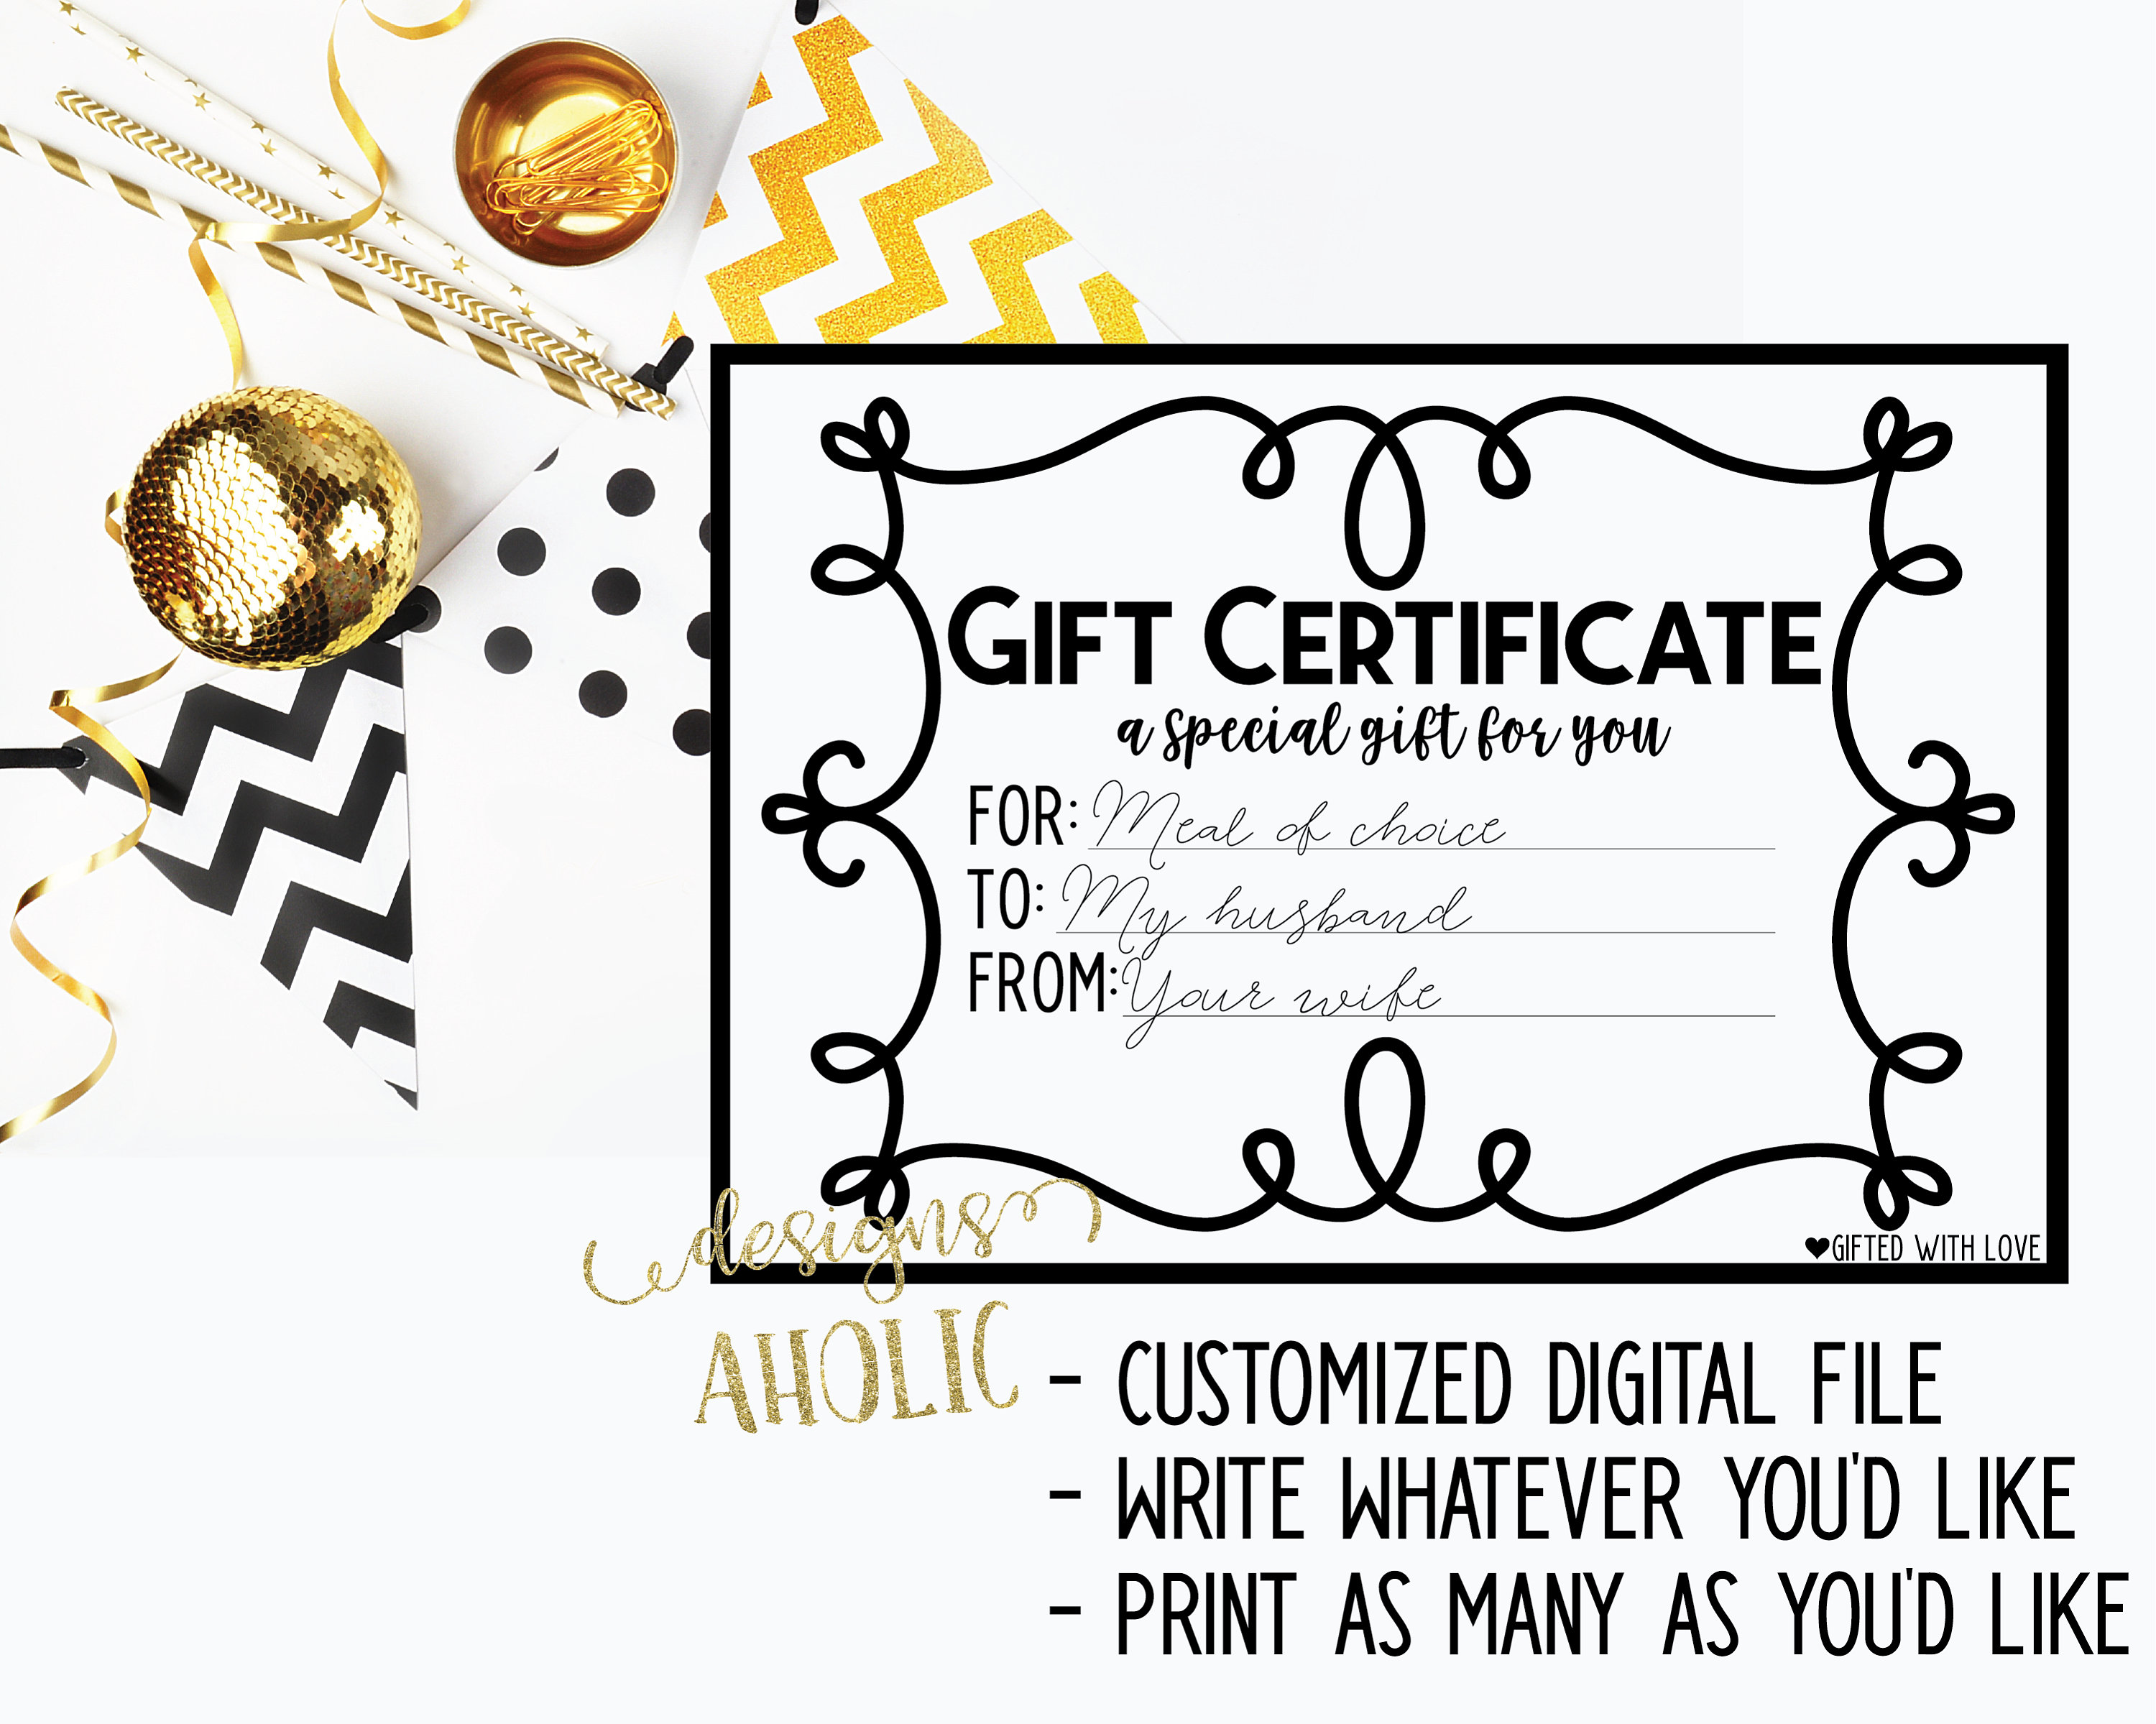 Custom Gift Certificates - Personalize and Order Prints Now